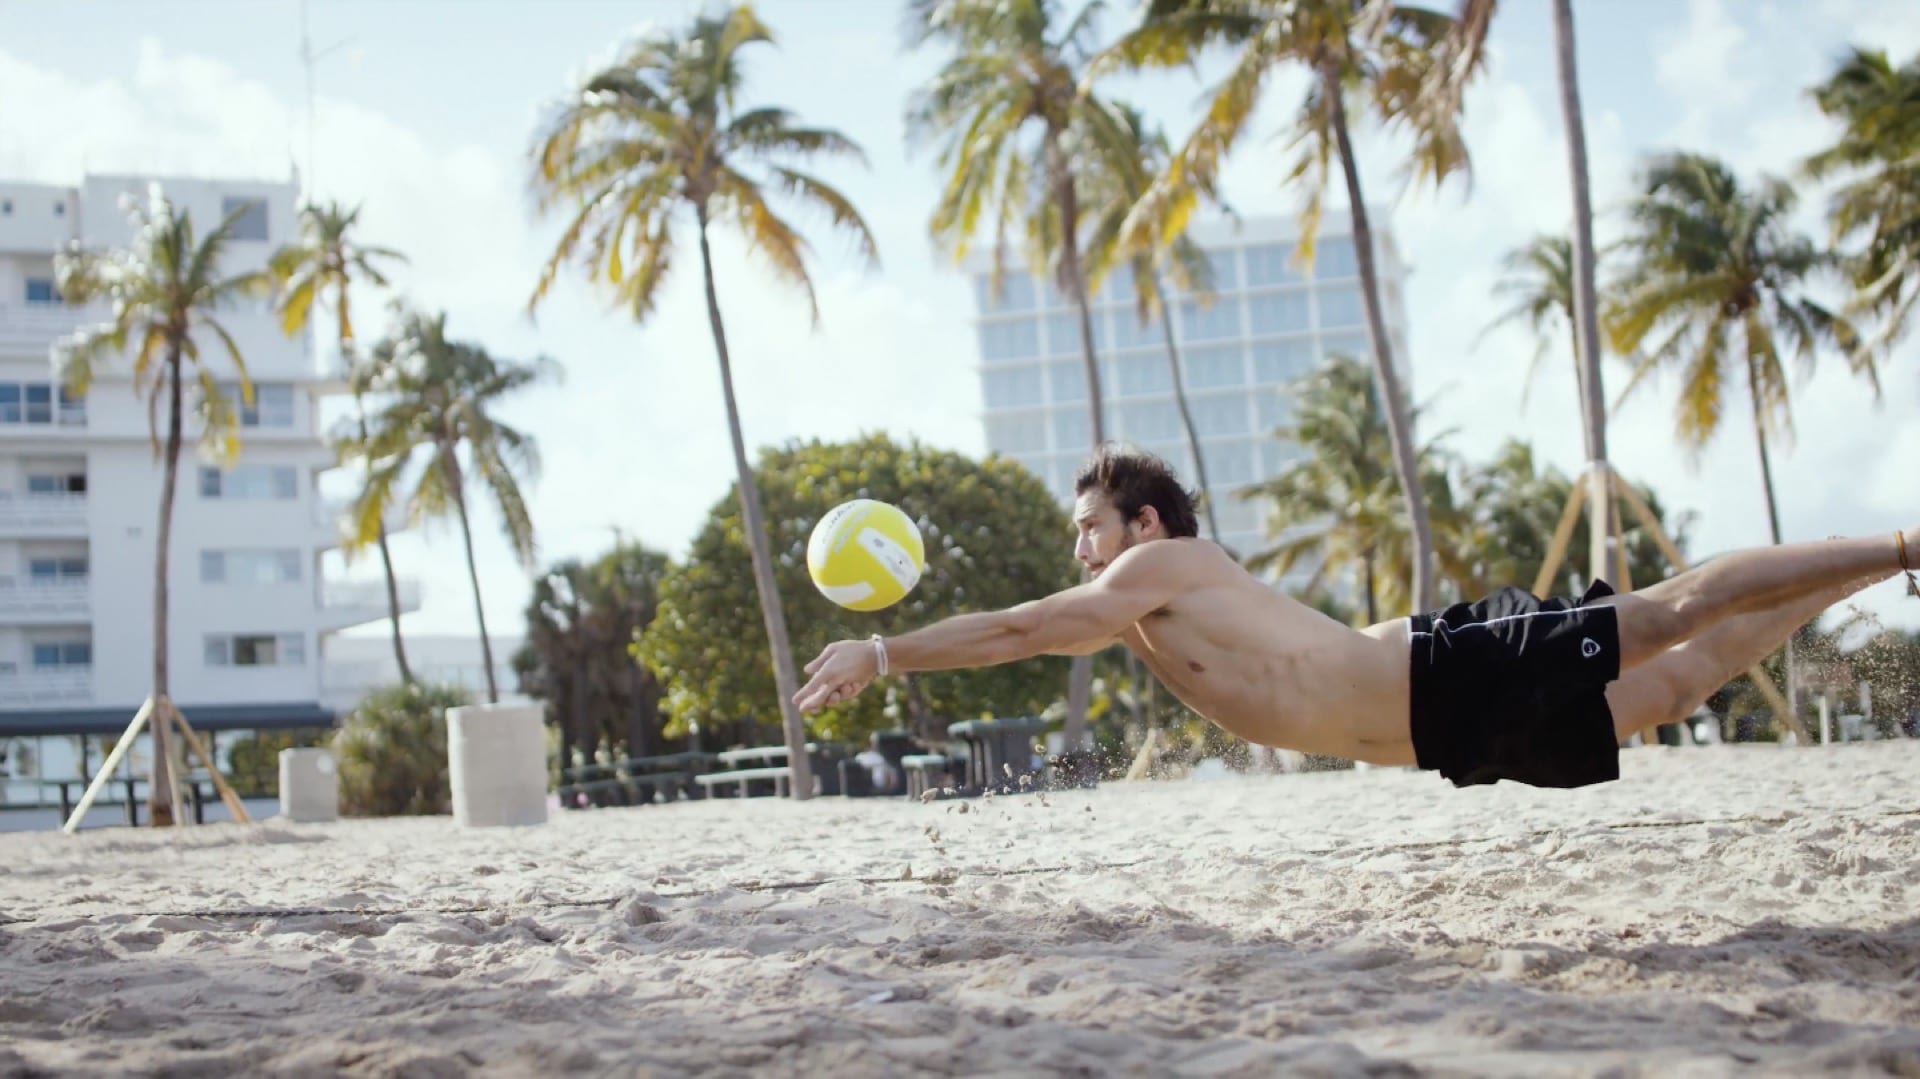 Man with black beach shorts diving to volley a yellow and white volleyball on a beach surrounded by palm trees.